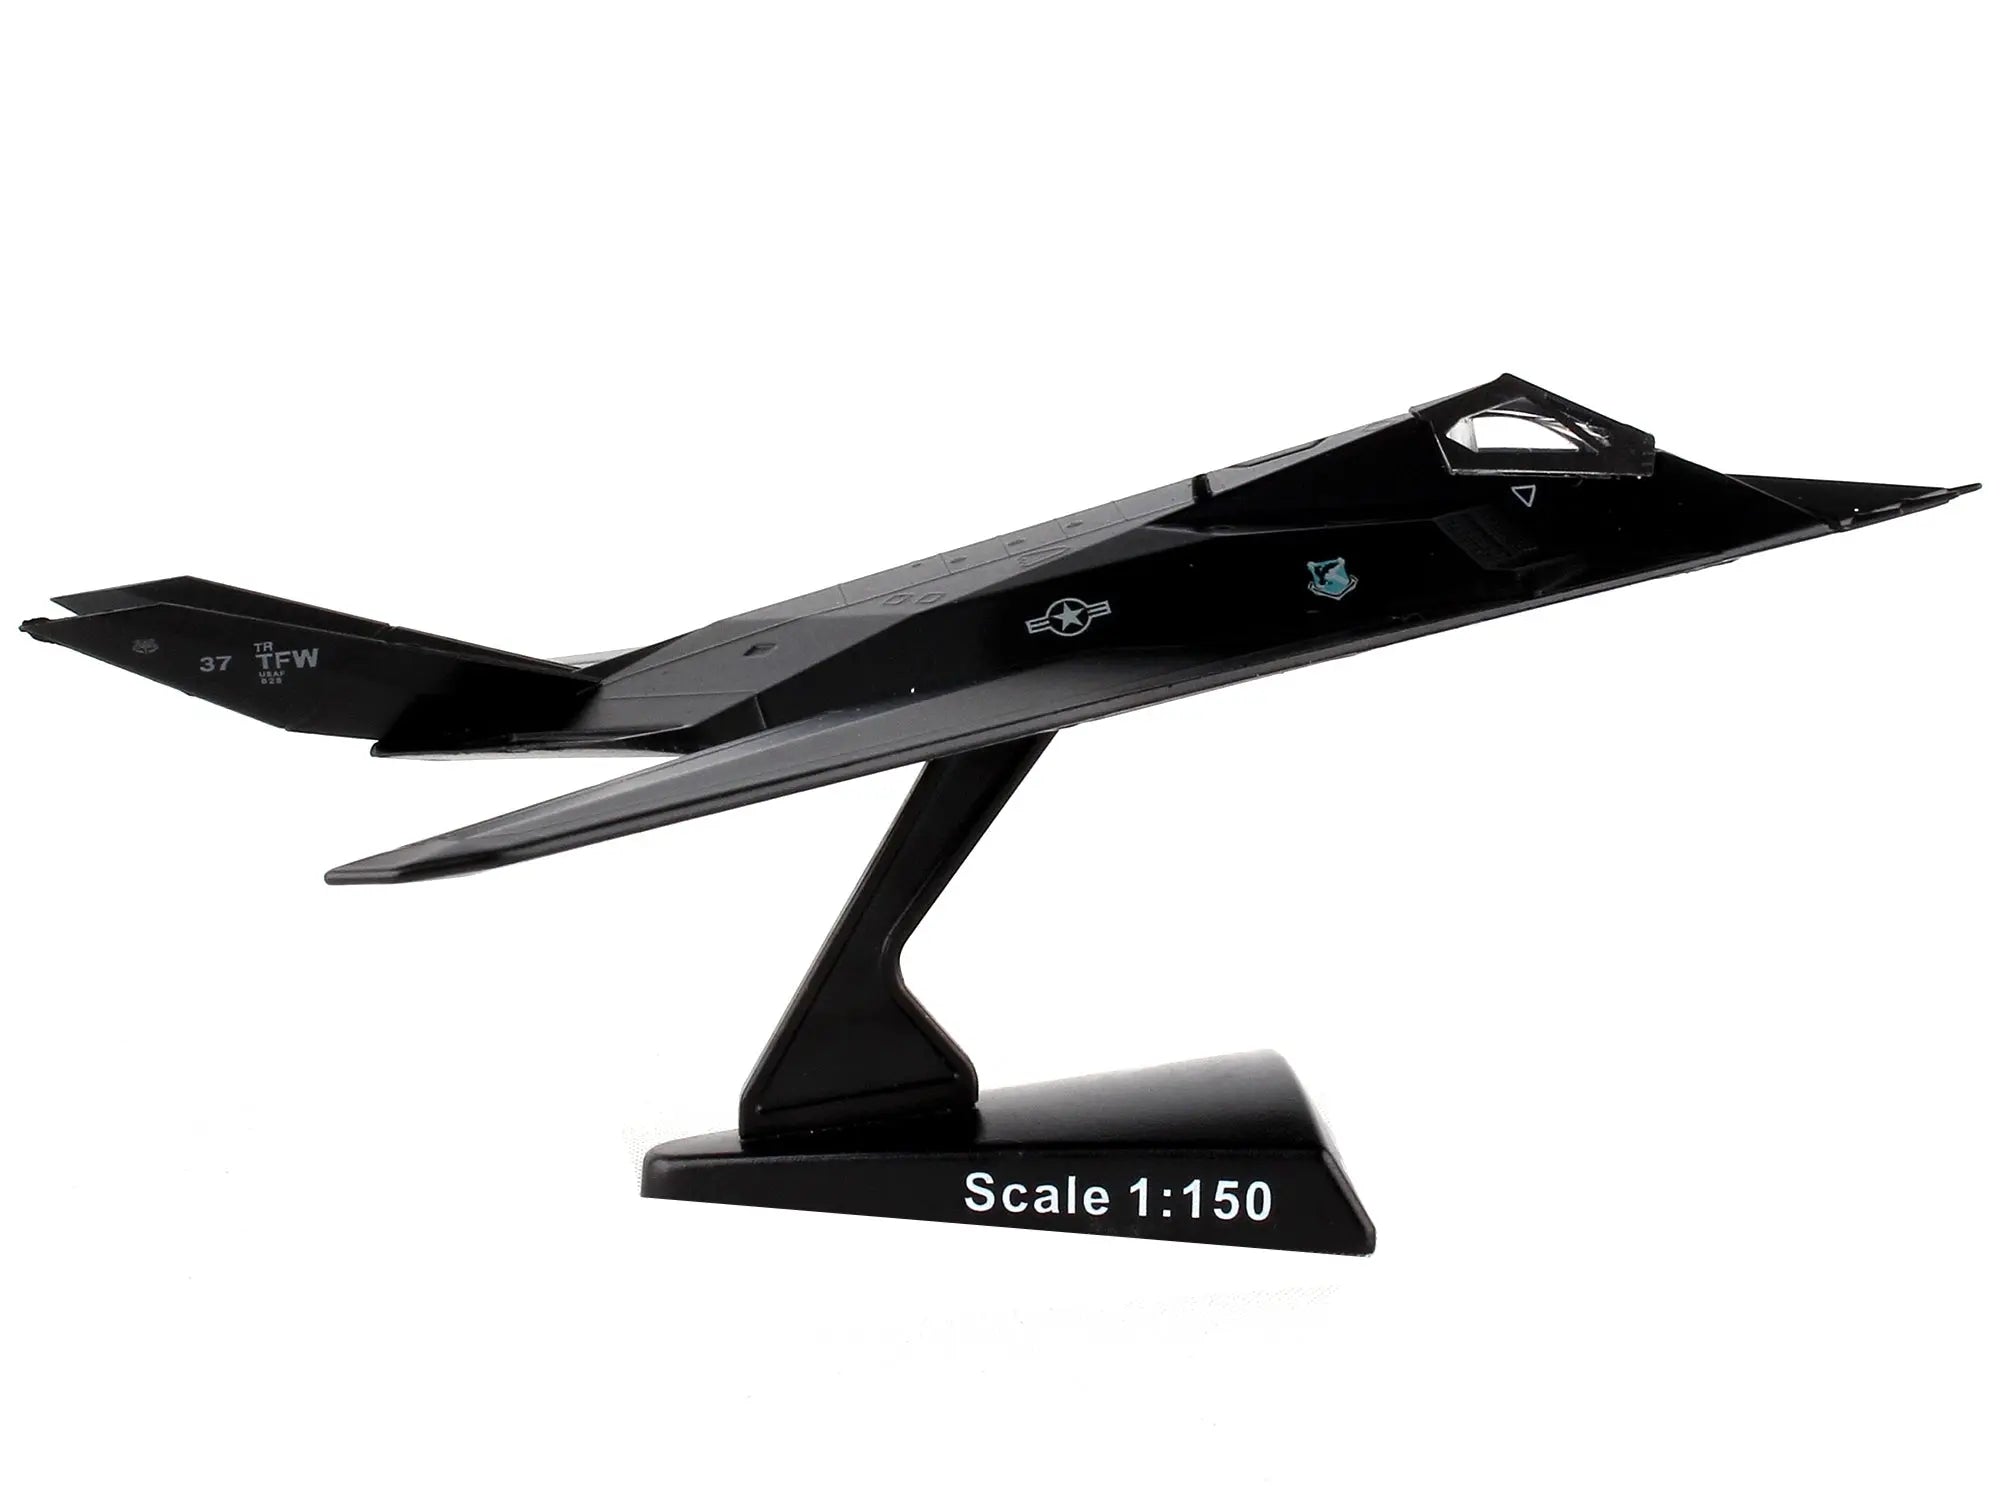 Lockheed F-117 Nighthawk Stealth Aircraft "United States Air Force" 1/150 Diecast Model Airplane by Postage Stamp Postage Stamp